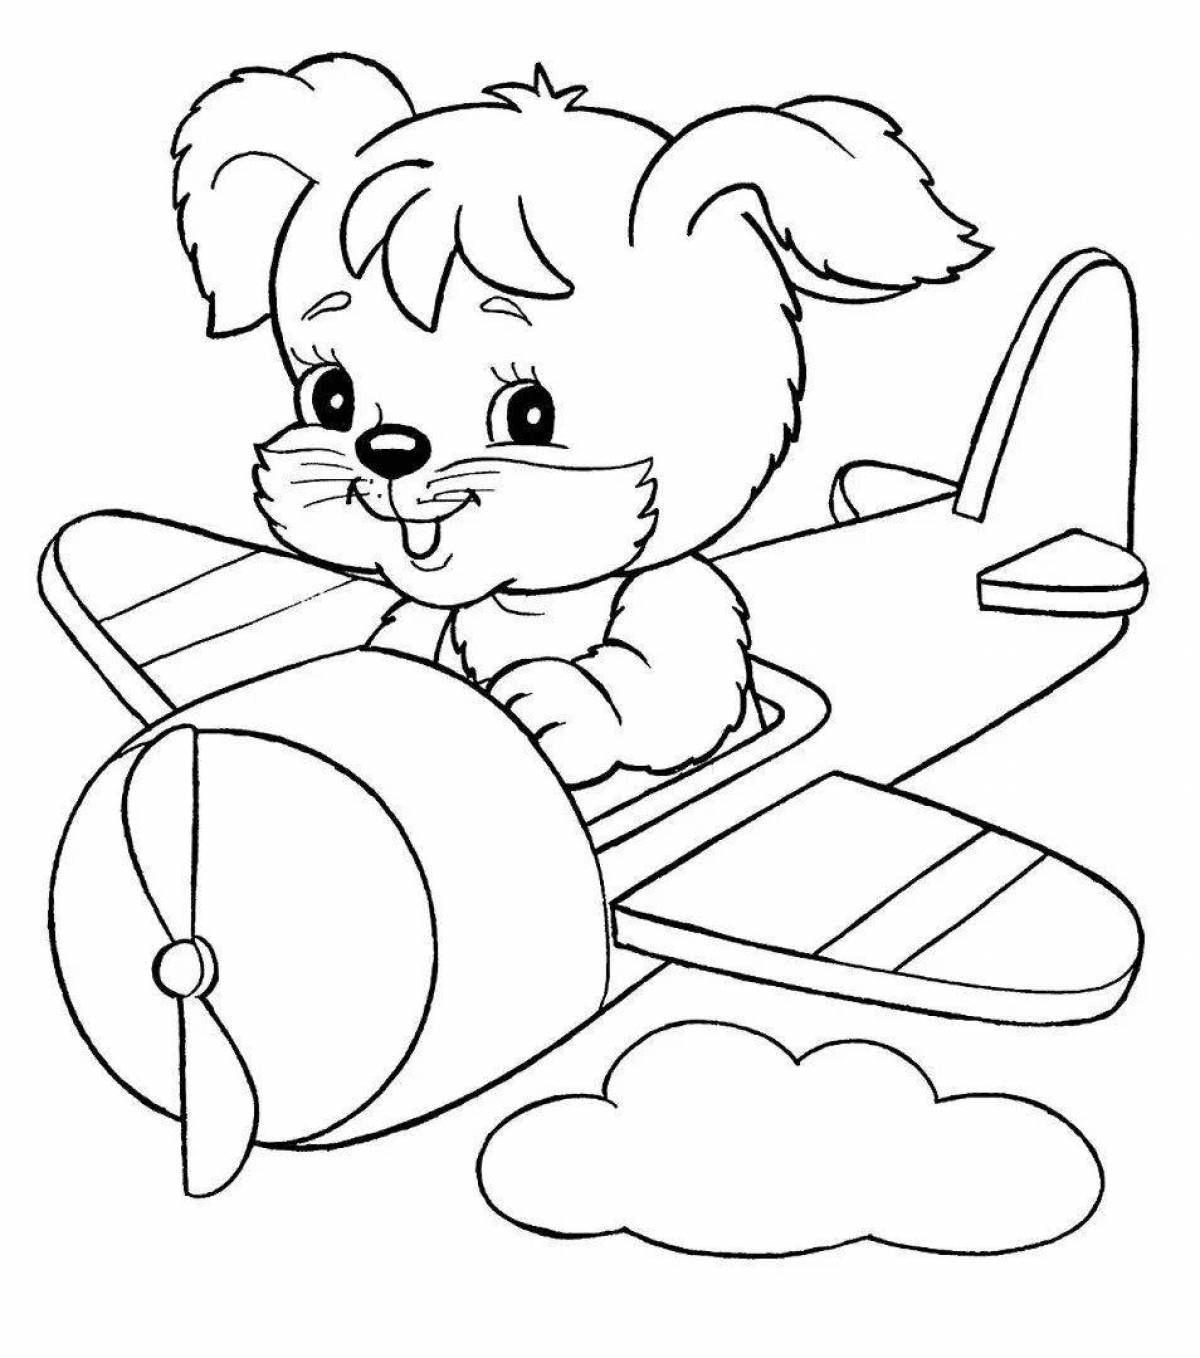 Color-frenzy coloring page for preschoolers